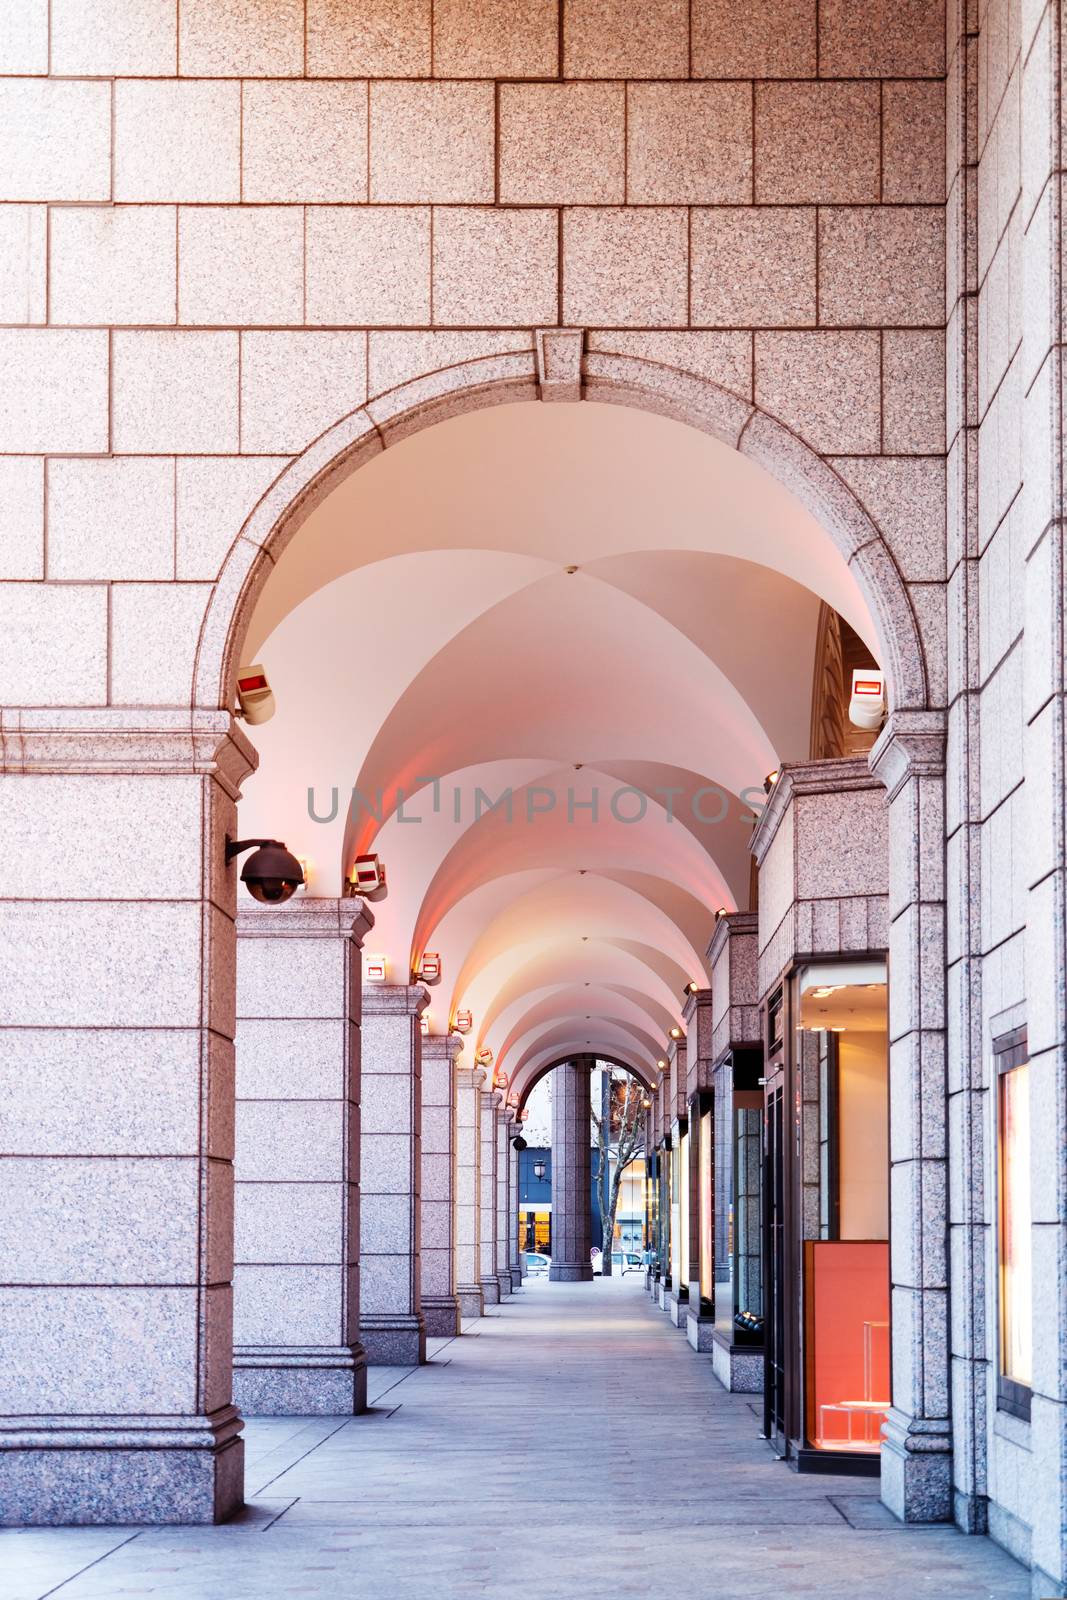 The Arched walkway at shopping mall in Sapporo Hokkaido, Japan